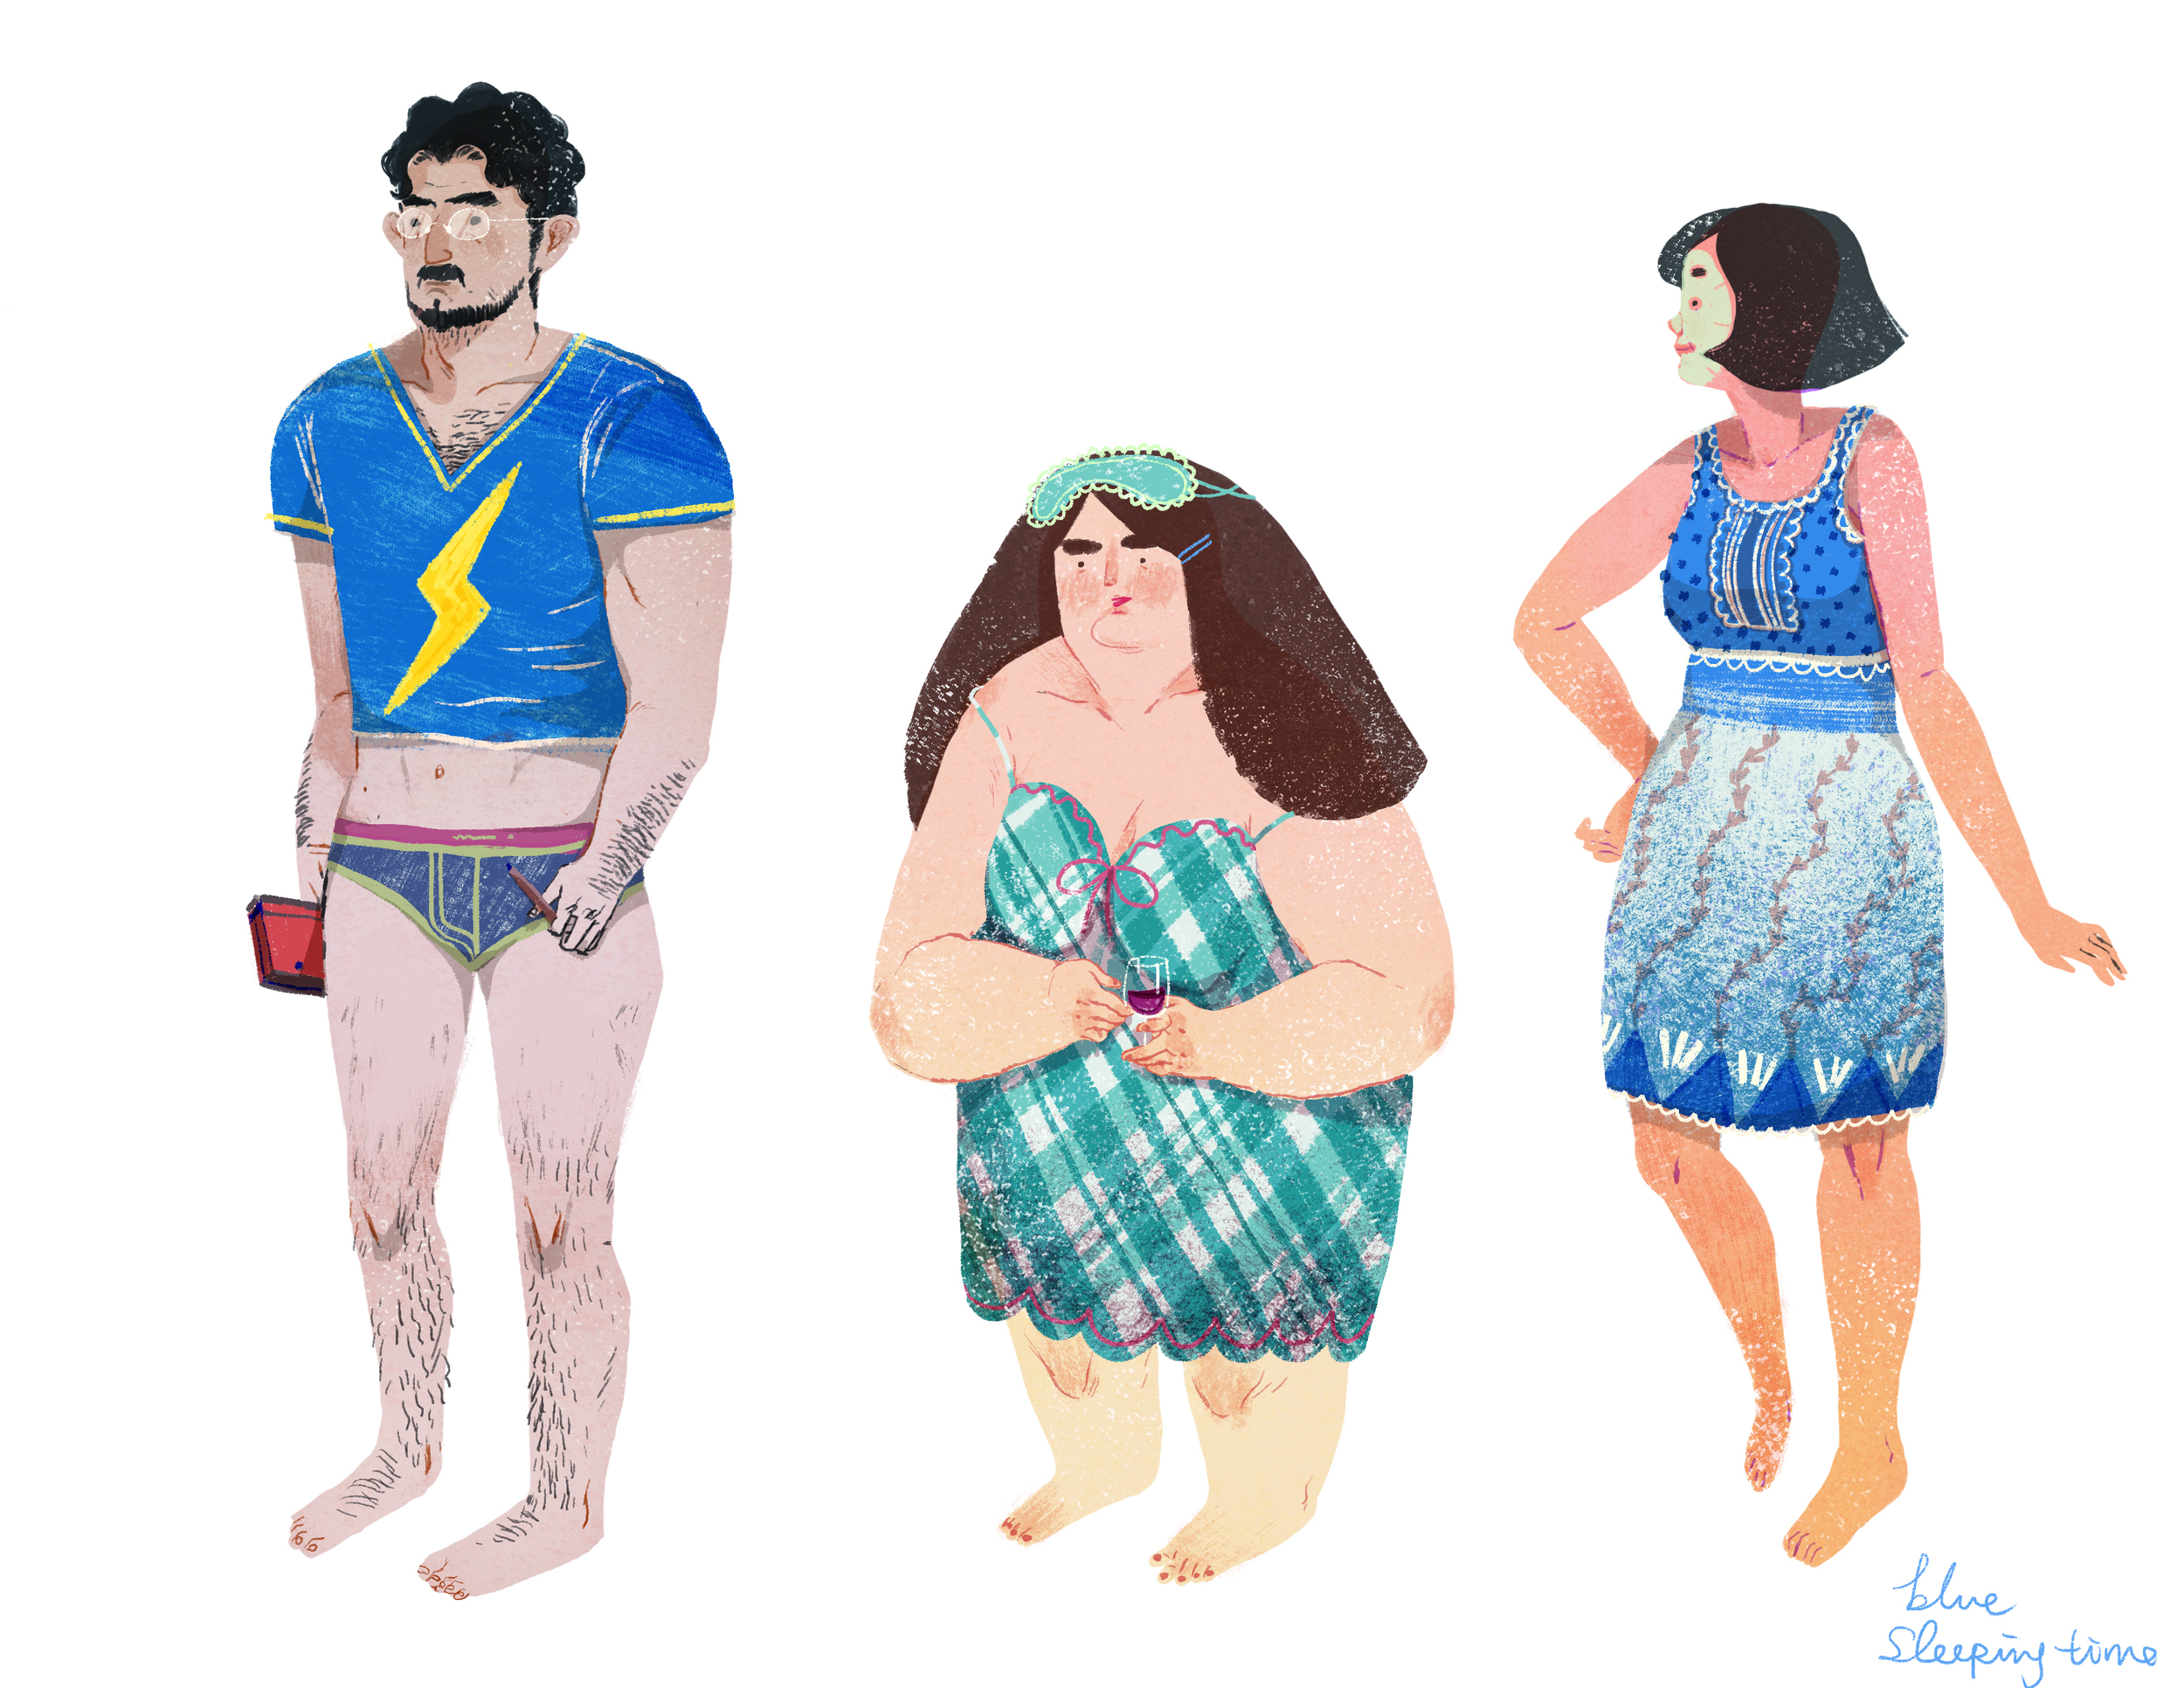 lifestyle drawing charactorblue.jpg